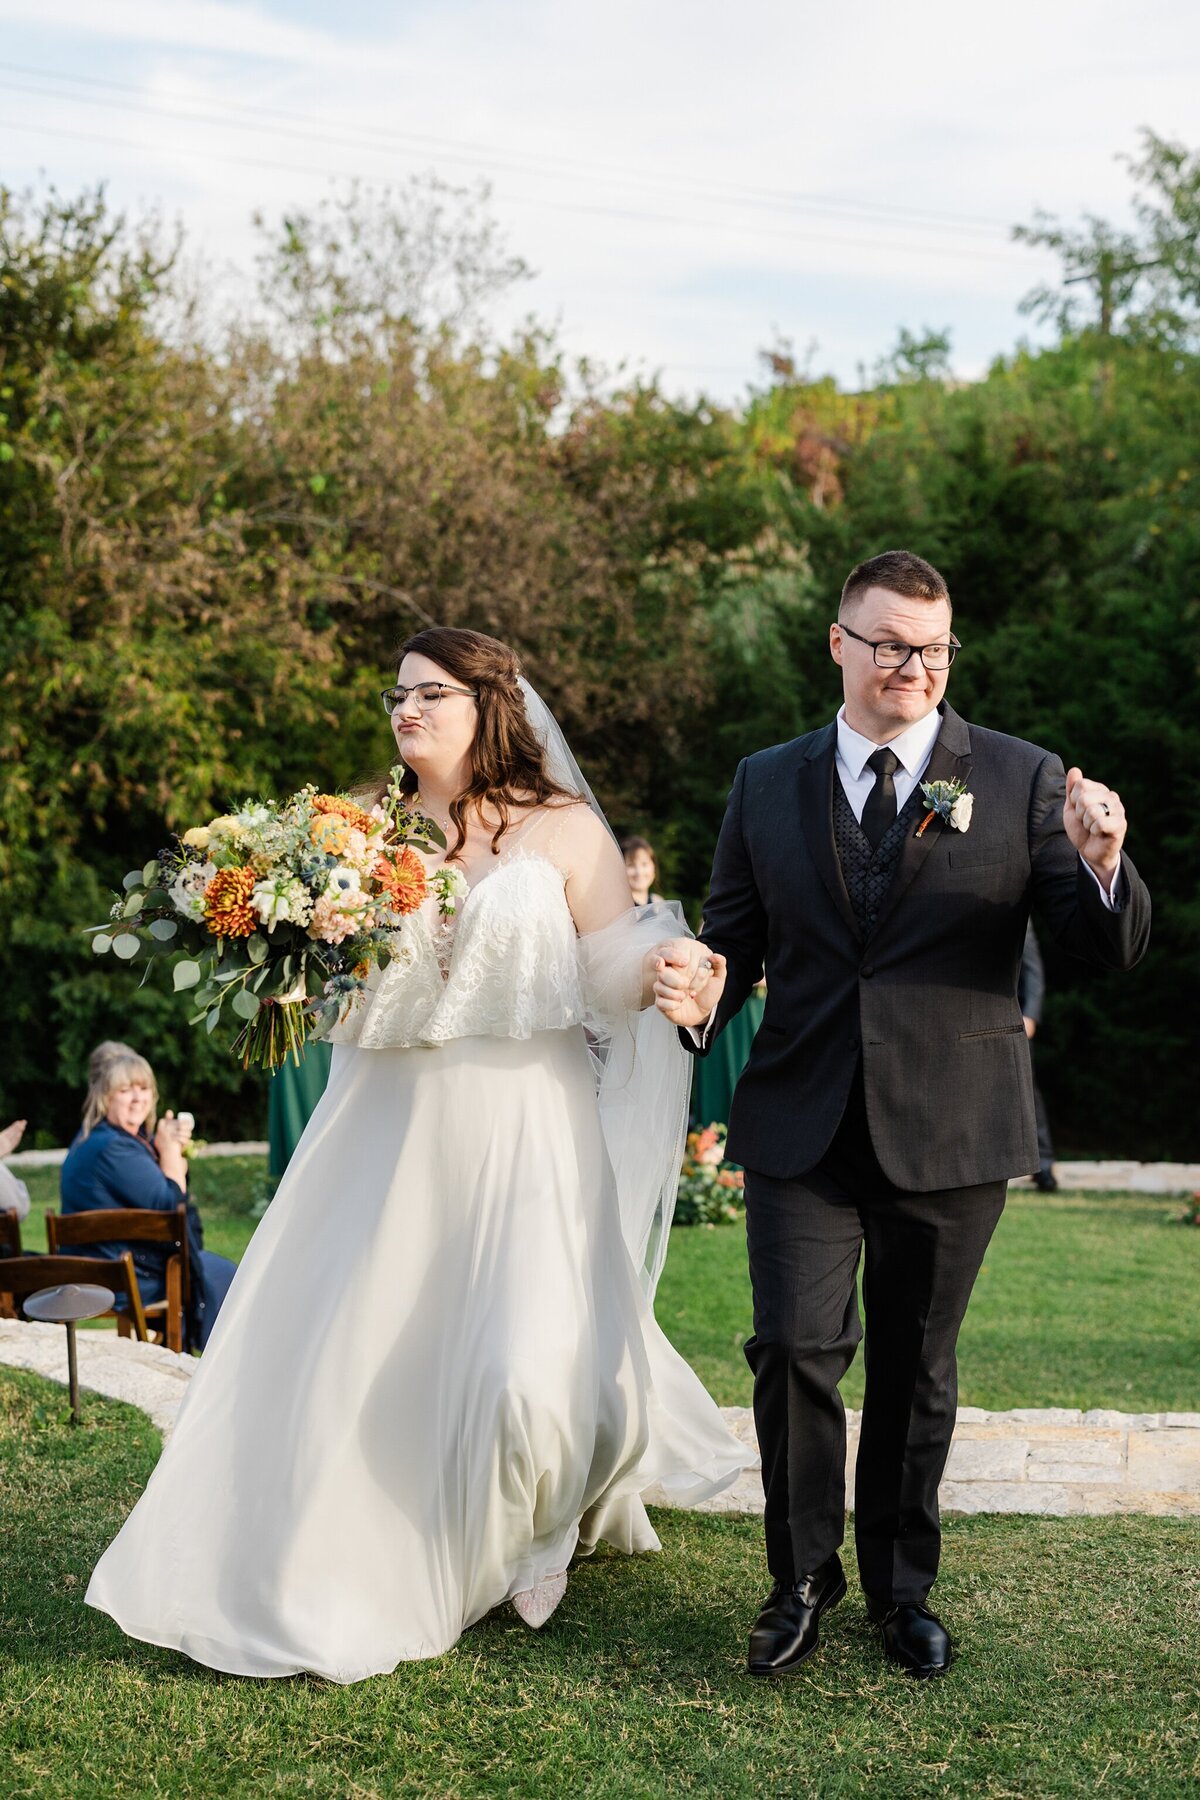 A candid shot of a bride and groom joyfully and jokingly recess down the aisle after their wedding ceremony at The Laurel in Grapevine, Texas. The bride is on the left and is wearing a long, flowing, white dress and a long veil while holding a large bouquet. The groom is on the right and is wearing a black suit with a boutonniere. They are both holding hands and wearing glasses.